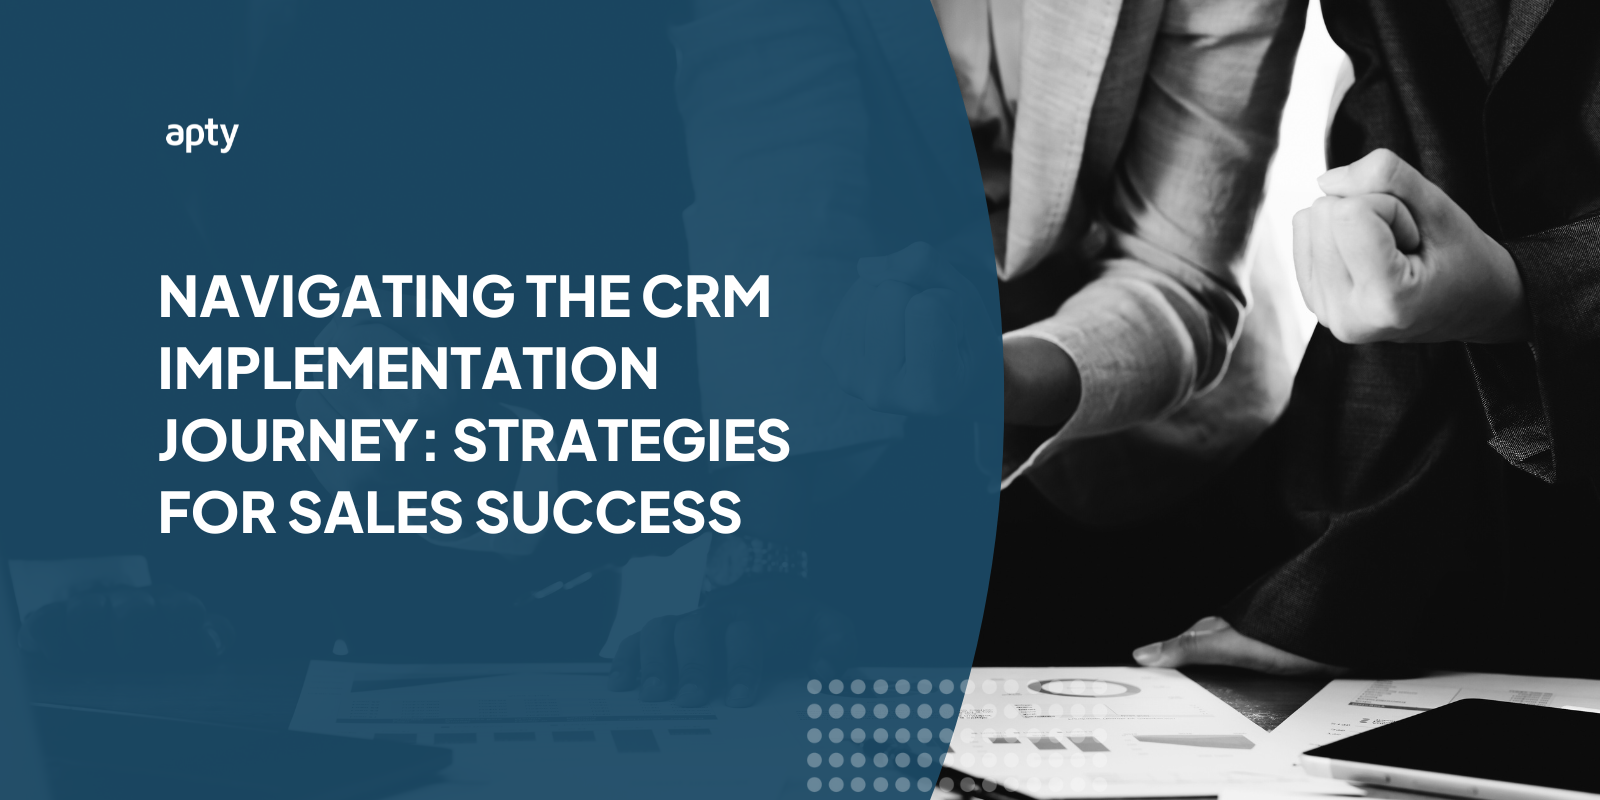 Navigating the CRM Implementation Journey: Strategies for Sales Success